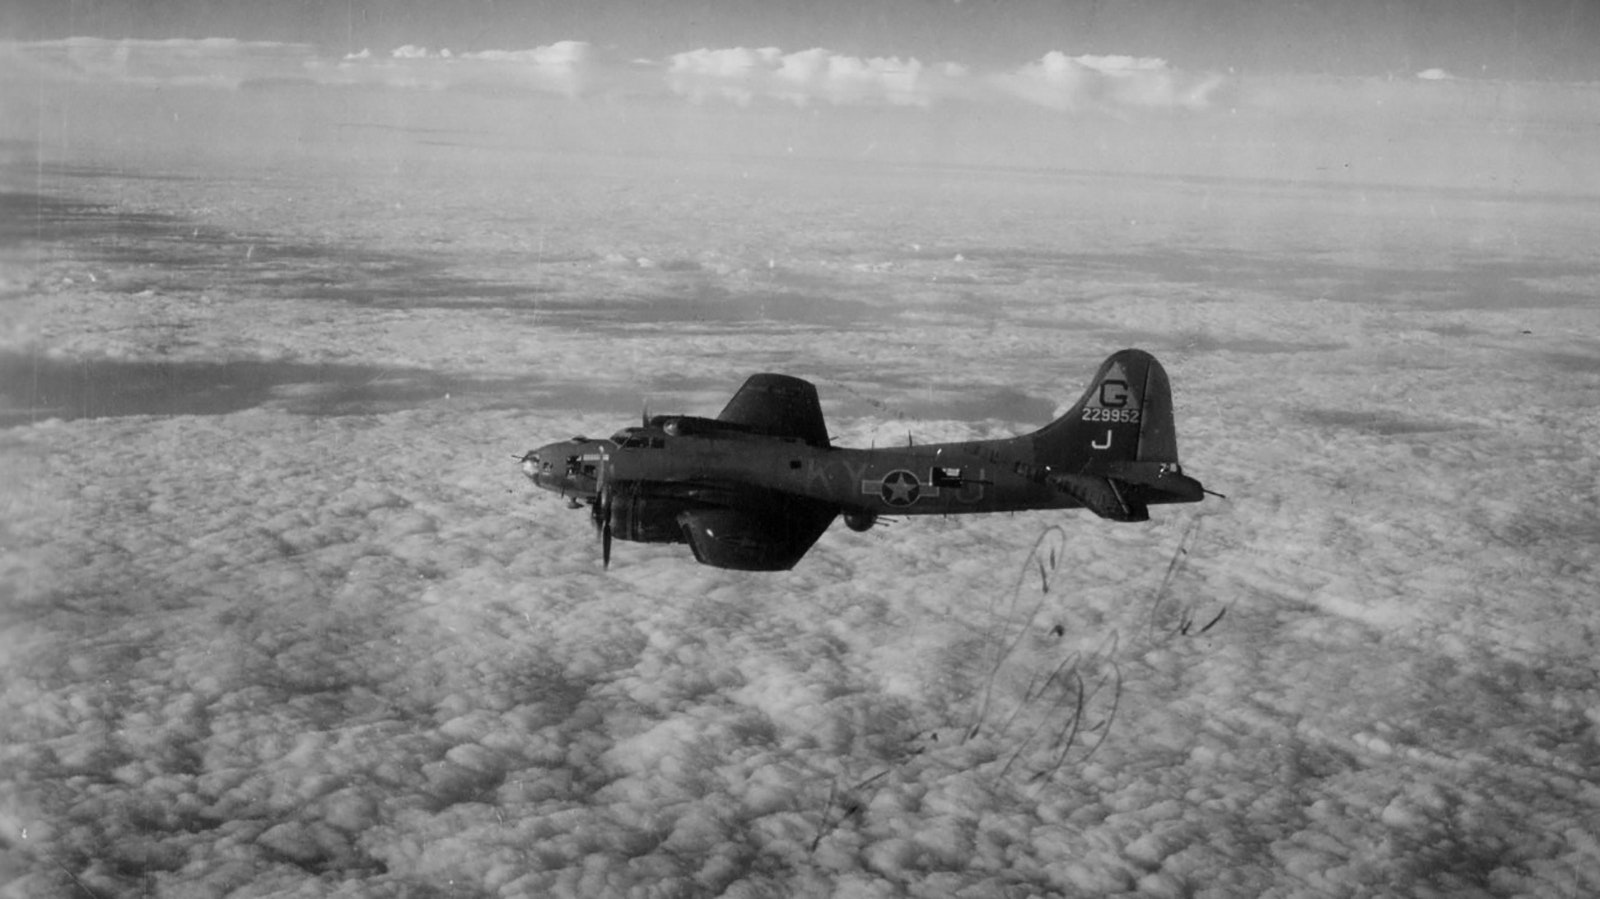 The B-17 “Sizzle” in flight with Bill Sikes at the controls during World War II.